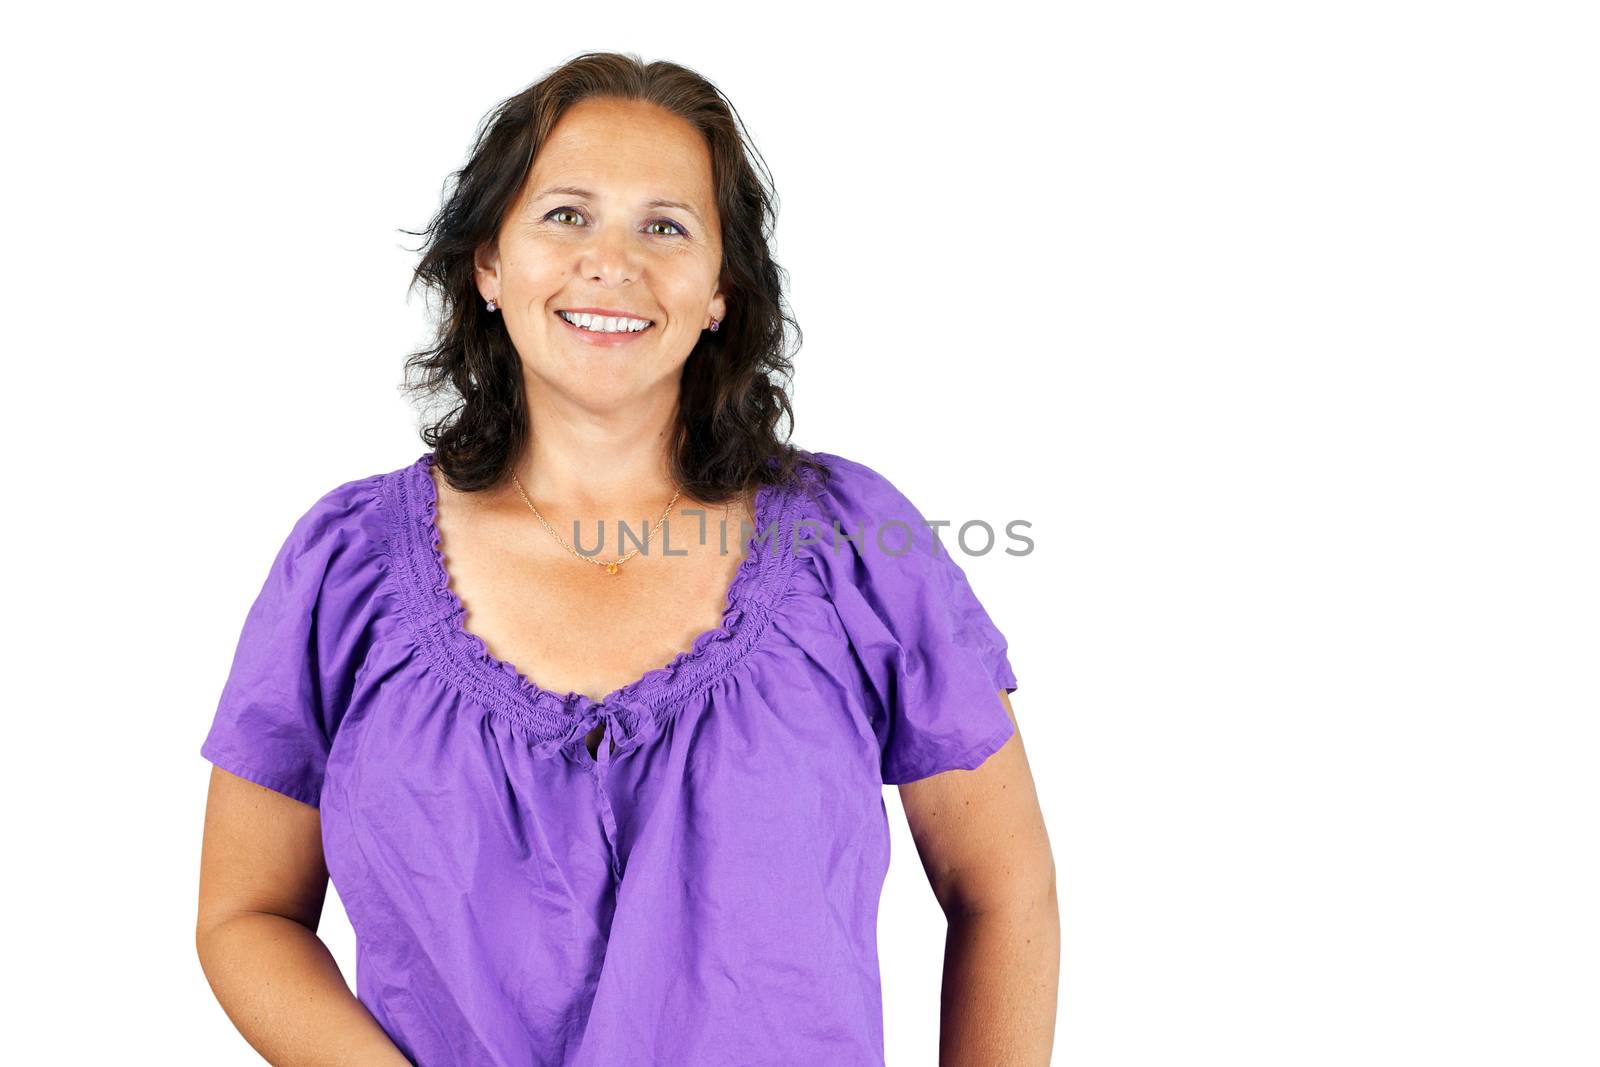 Smiling woman in purple by Mirage3